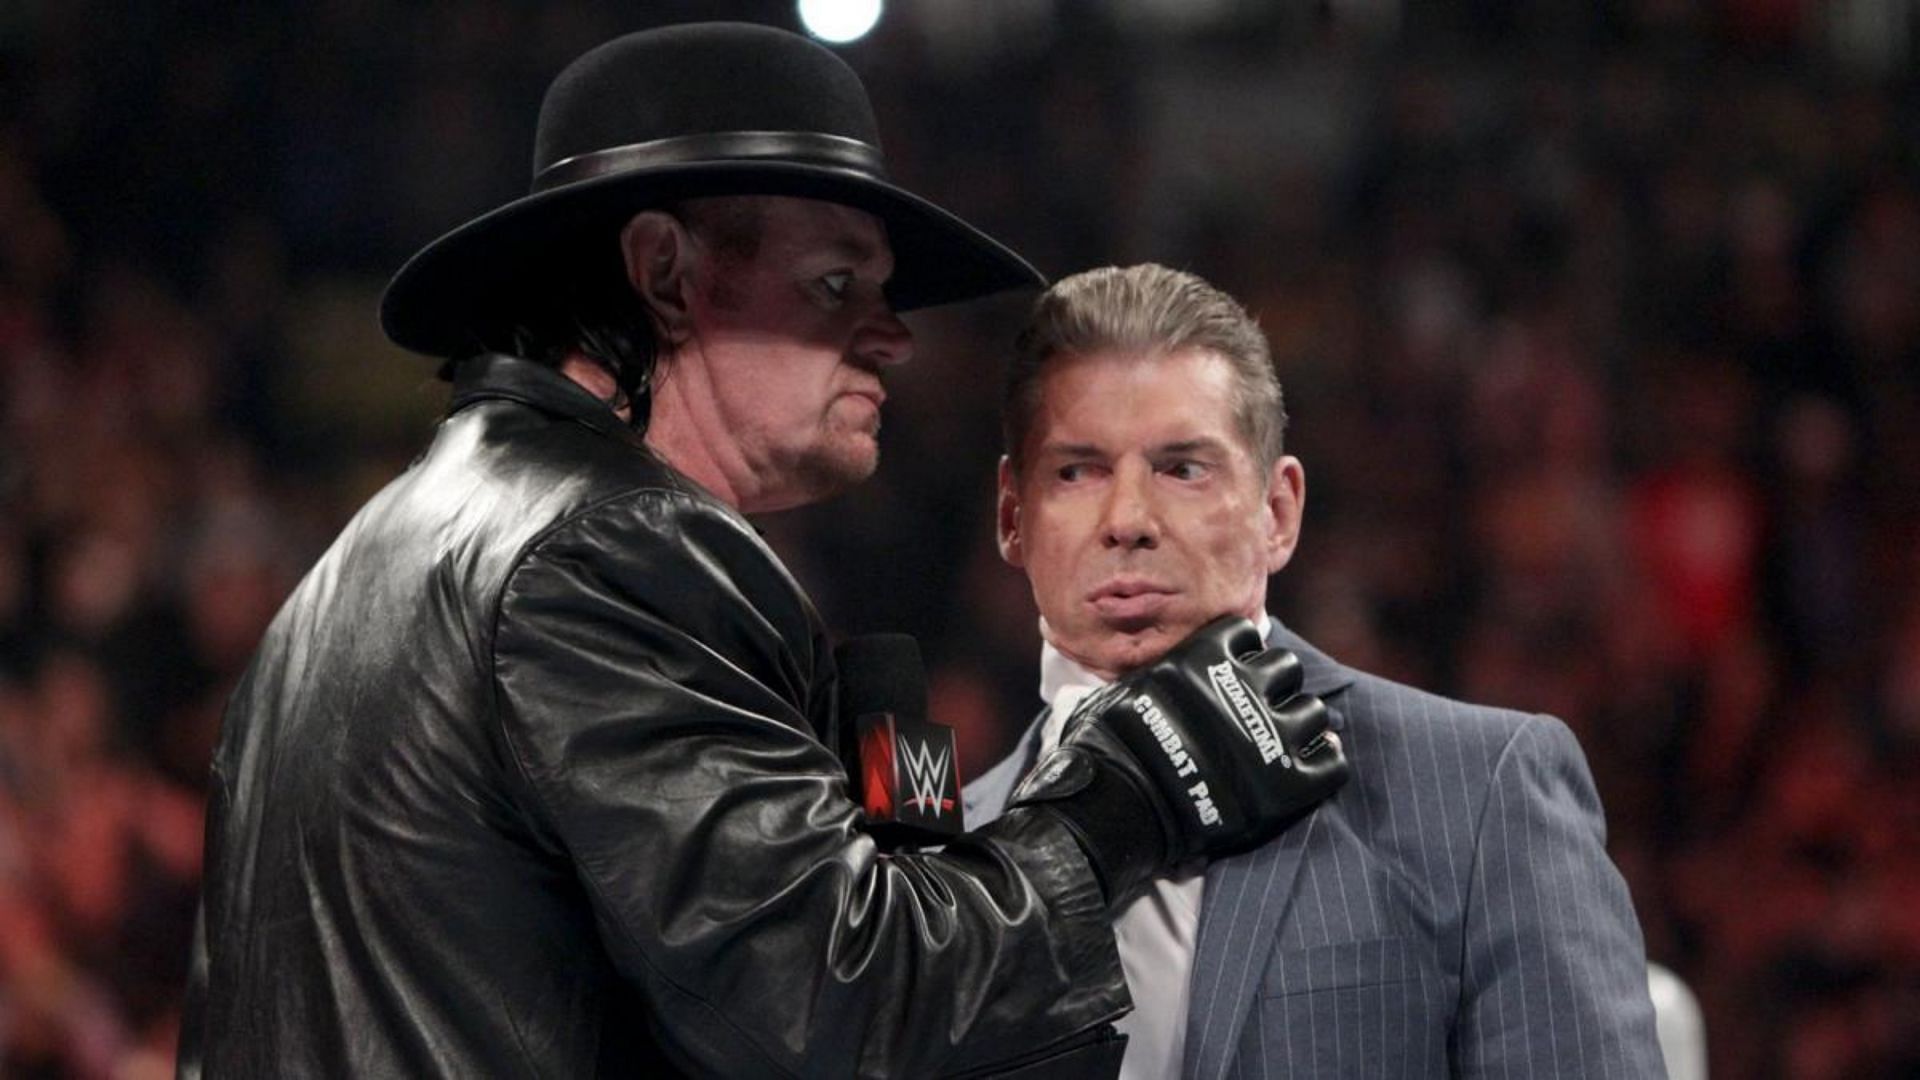 The Undertaker and Vince McMahon in 2016